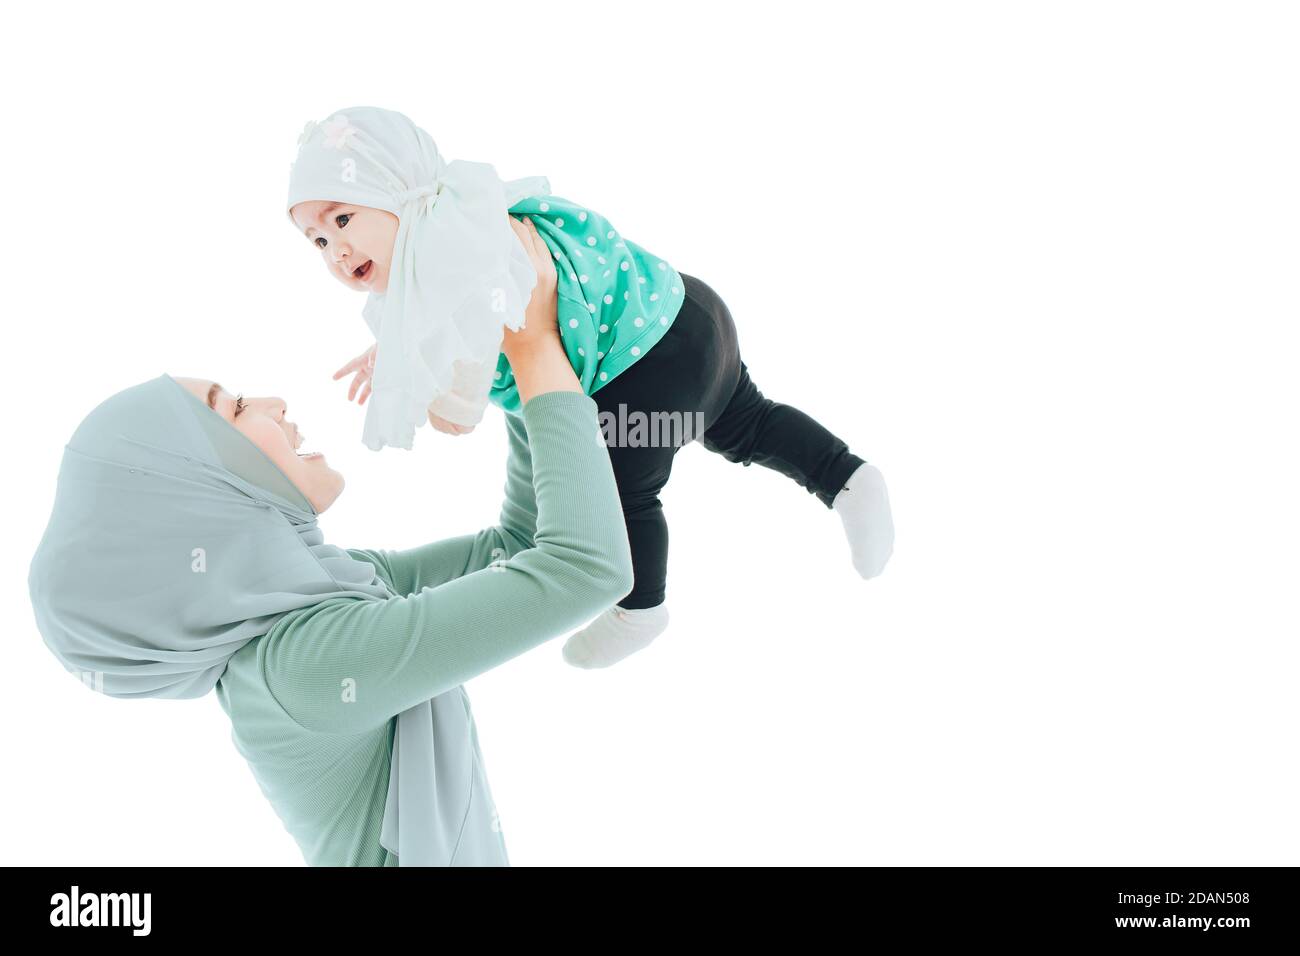 Muslim family or Islam mother rise play with baby isolated on white background. Stock Photo